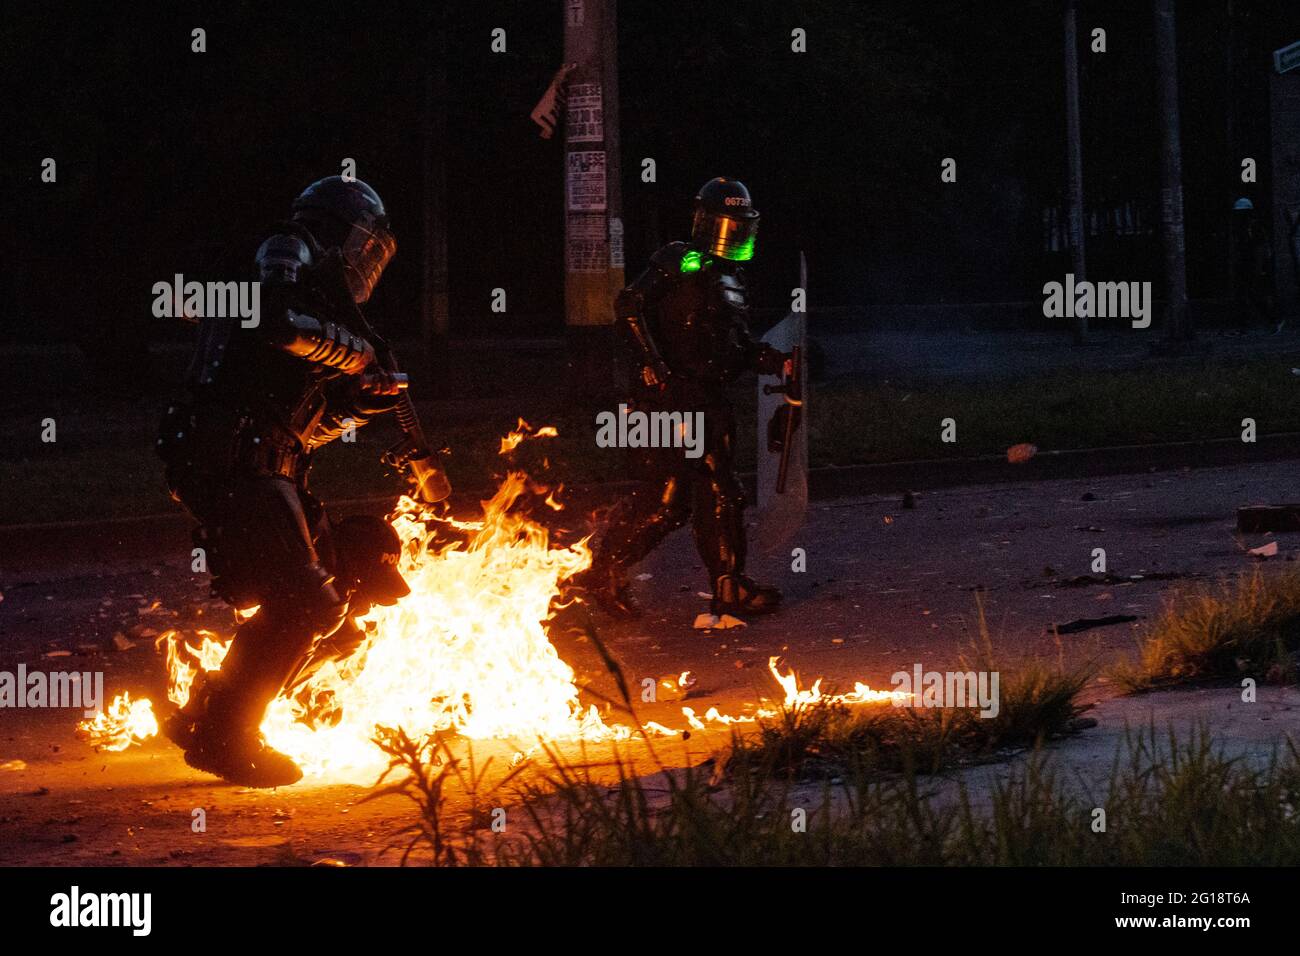 A riot police officer of Colombia (ESMAD) jumps from a molotov bomb that just exploded on its feet as clashes between demonstrators and Colombia's riot police (ESMAD) erupt in Medellín, Colombia after several weeks of anti-government protest against President Ivan Duque's tax and health reforms and unrest and abuse of authority cases that leave at least 70 dead according to NGOs on June 4, 2021. Stock Photo